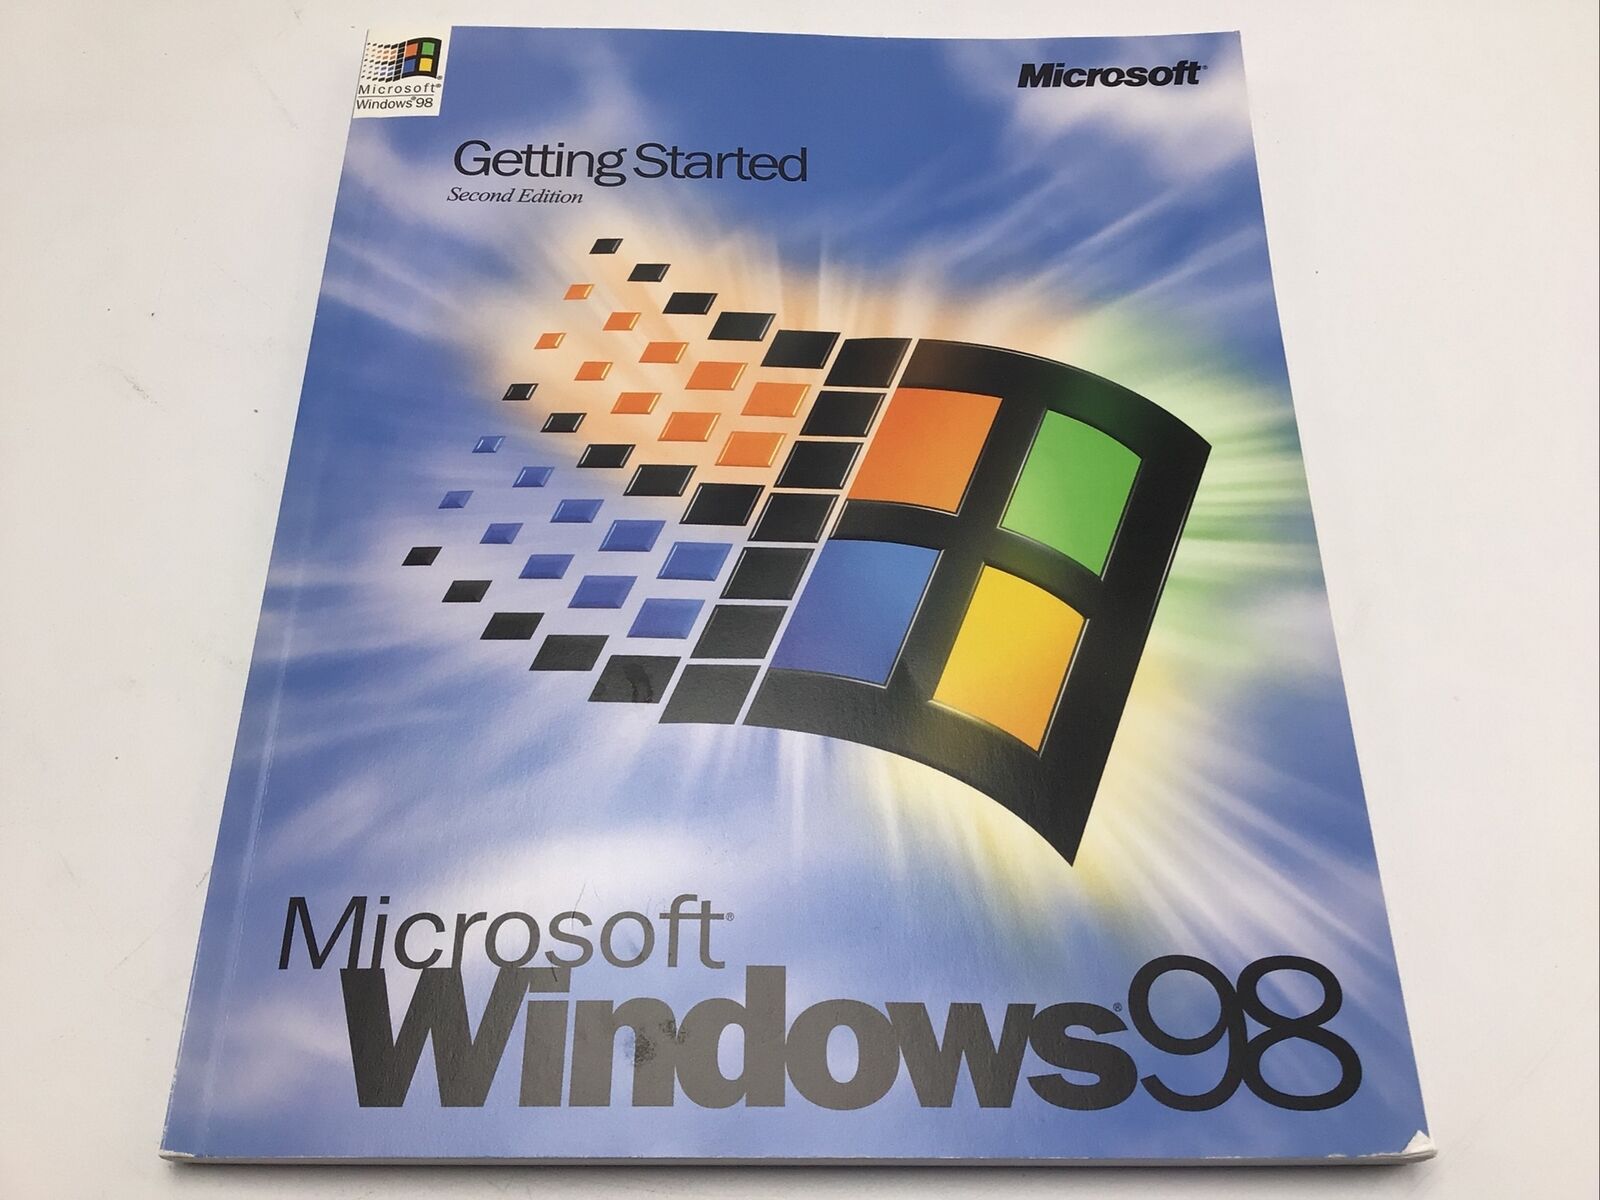 Microsoft Windows 98 Second Edition Book Getting Started Vintage 